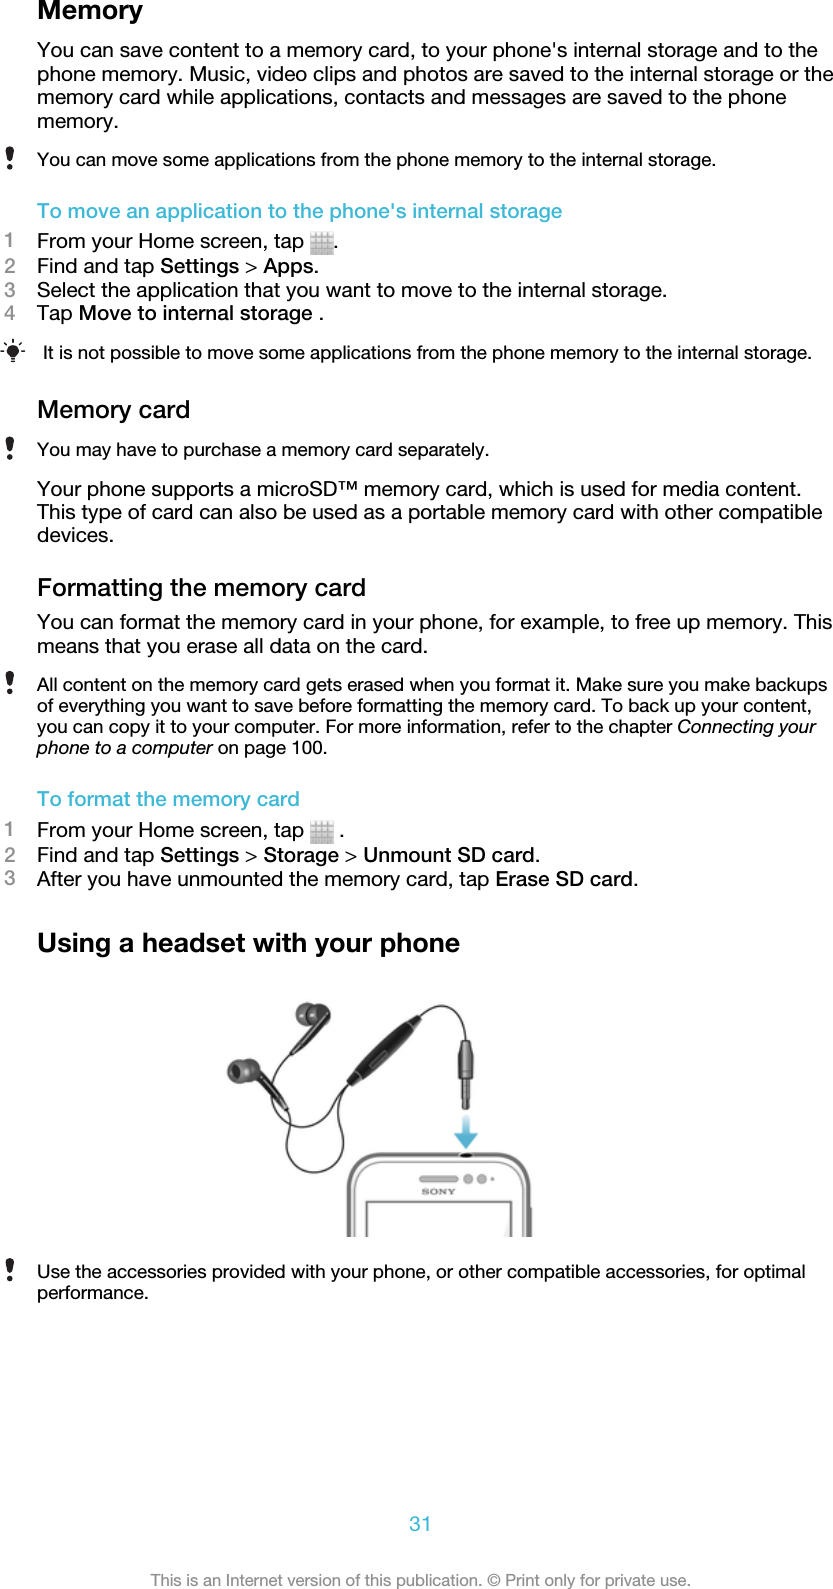 MemoryYou can save content to a memory card, to your phone&apos;s internal storage and to thephone memory. Music, video clips and photos are saved to the internal storage or thememory card while applications, contacts and messages are saved to the phonememory.You can move some applications from the phone memory to the internal storage.To move an application to the phone&apos;s internal storage1From your Home screen, tap  .2Find and tap Settings &gt; Apps.3Select the application that you want to move to the internal storage.4Tap Move to internal storage .It is not possible to move some applications from the phone memory to the internal storage.Memory cardYou may have to purchase a memory card separately.Your phone supports a microSD™ memory card, which is used for media content.This type of card can also be used as a portable memory card with other compatibledevices.Formatting the memory cardYou can format the memory card in your phone, for example, to free up memory. Thismeans that you erase all data on the card.All content on the memory card gets erased when you format it. Make sure you make backupsof everything you want to save before formatting the memory card. To back up your content,you can copy it to your computer. For more information, refer to the chapter Connecting yourphone to a computer on page 100.To format the memory card1From your Home screen, tap   .2Find and tap Settings &gt; Storage &gt; Unmount SD card.3After you have unmounted the memory card, tap Erase SD card.Using a headset with your phoneUse the accessories provided with your phone, or other compatible accessories, for optimalperformance.31This is an Internet version of this publication. © Print only for private use.